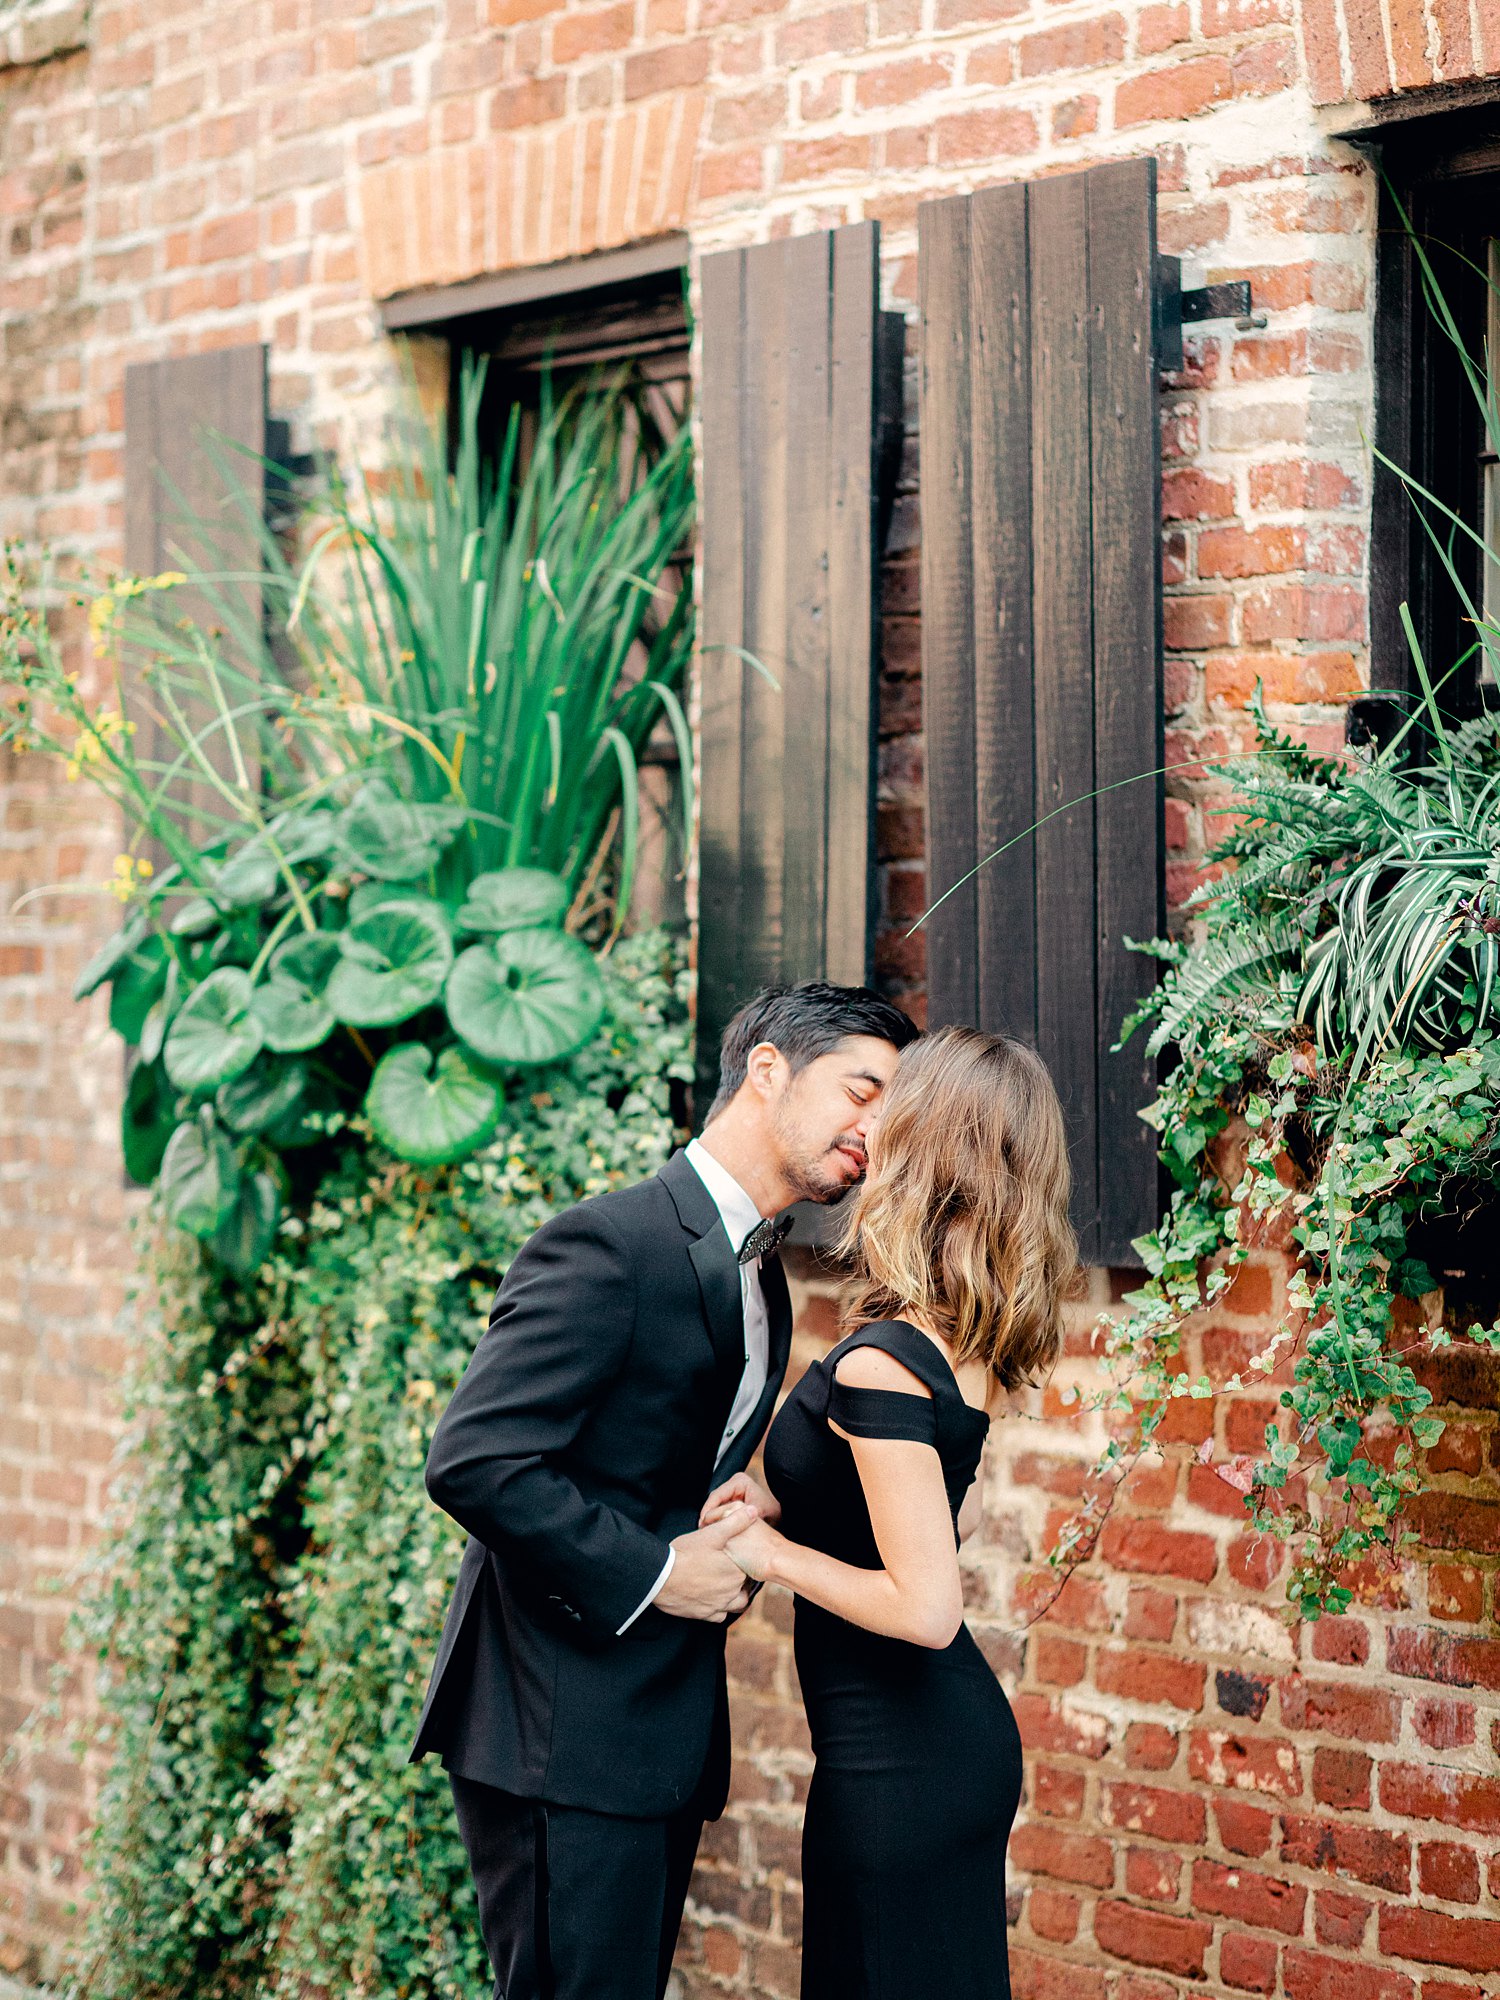 Man in black tuxedo kissing girl in black dress in front of red brick and green plants